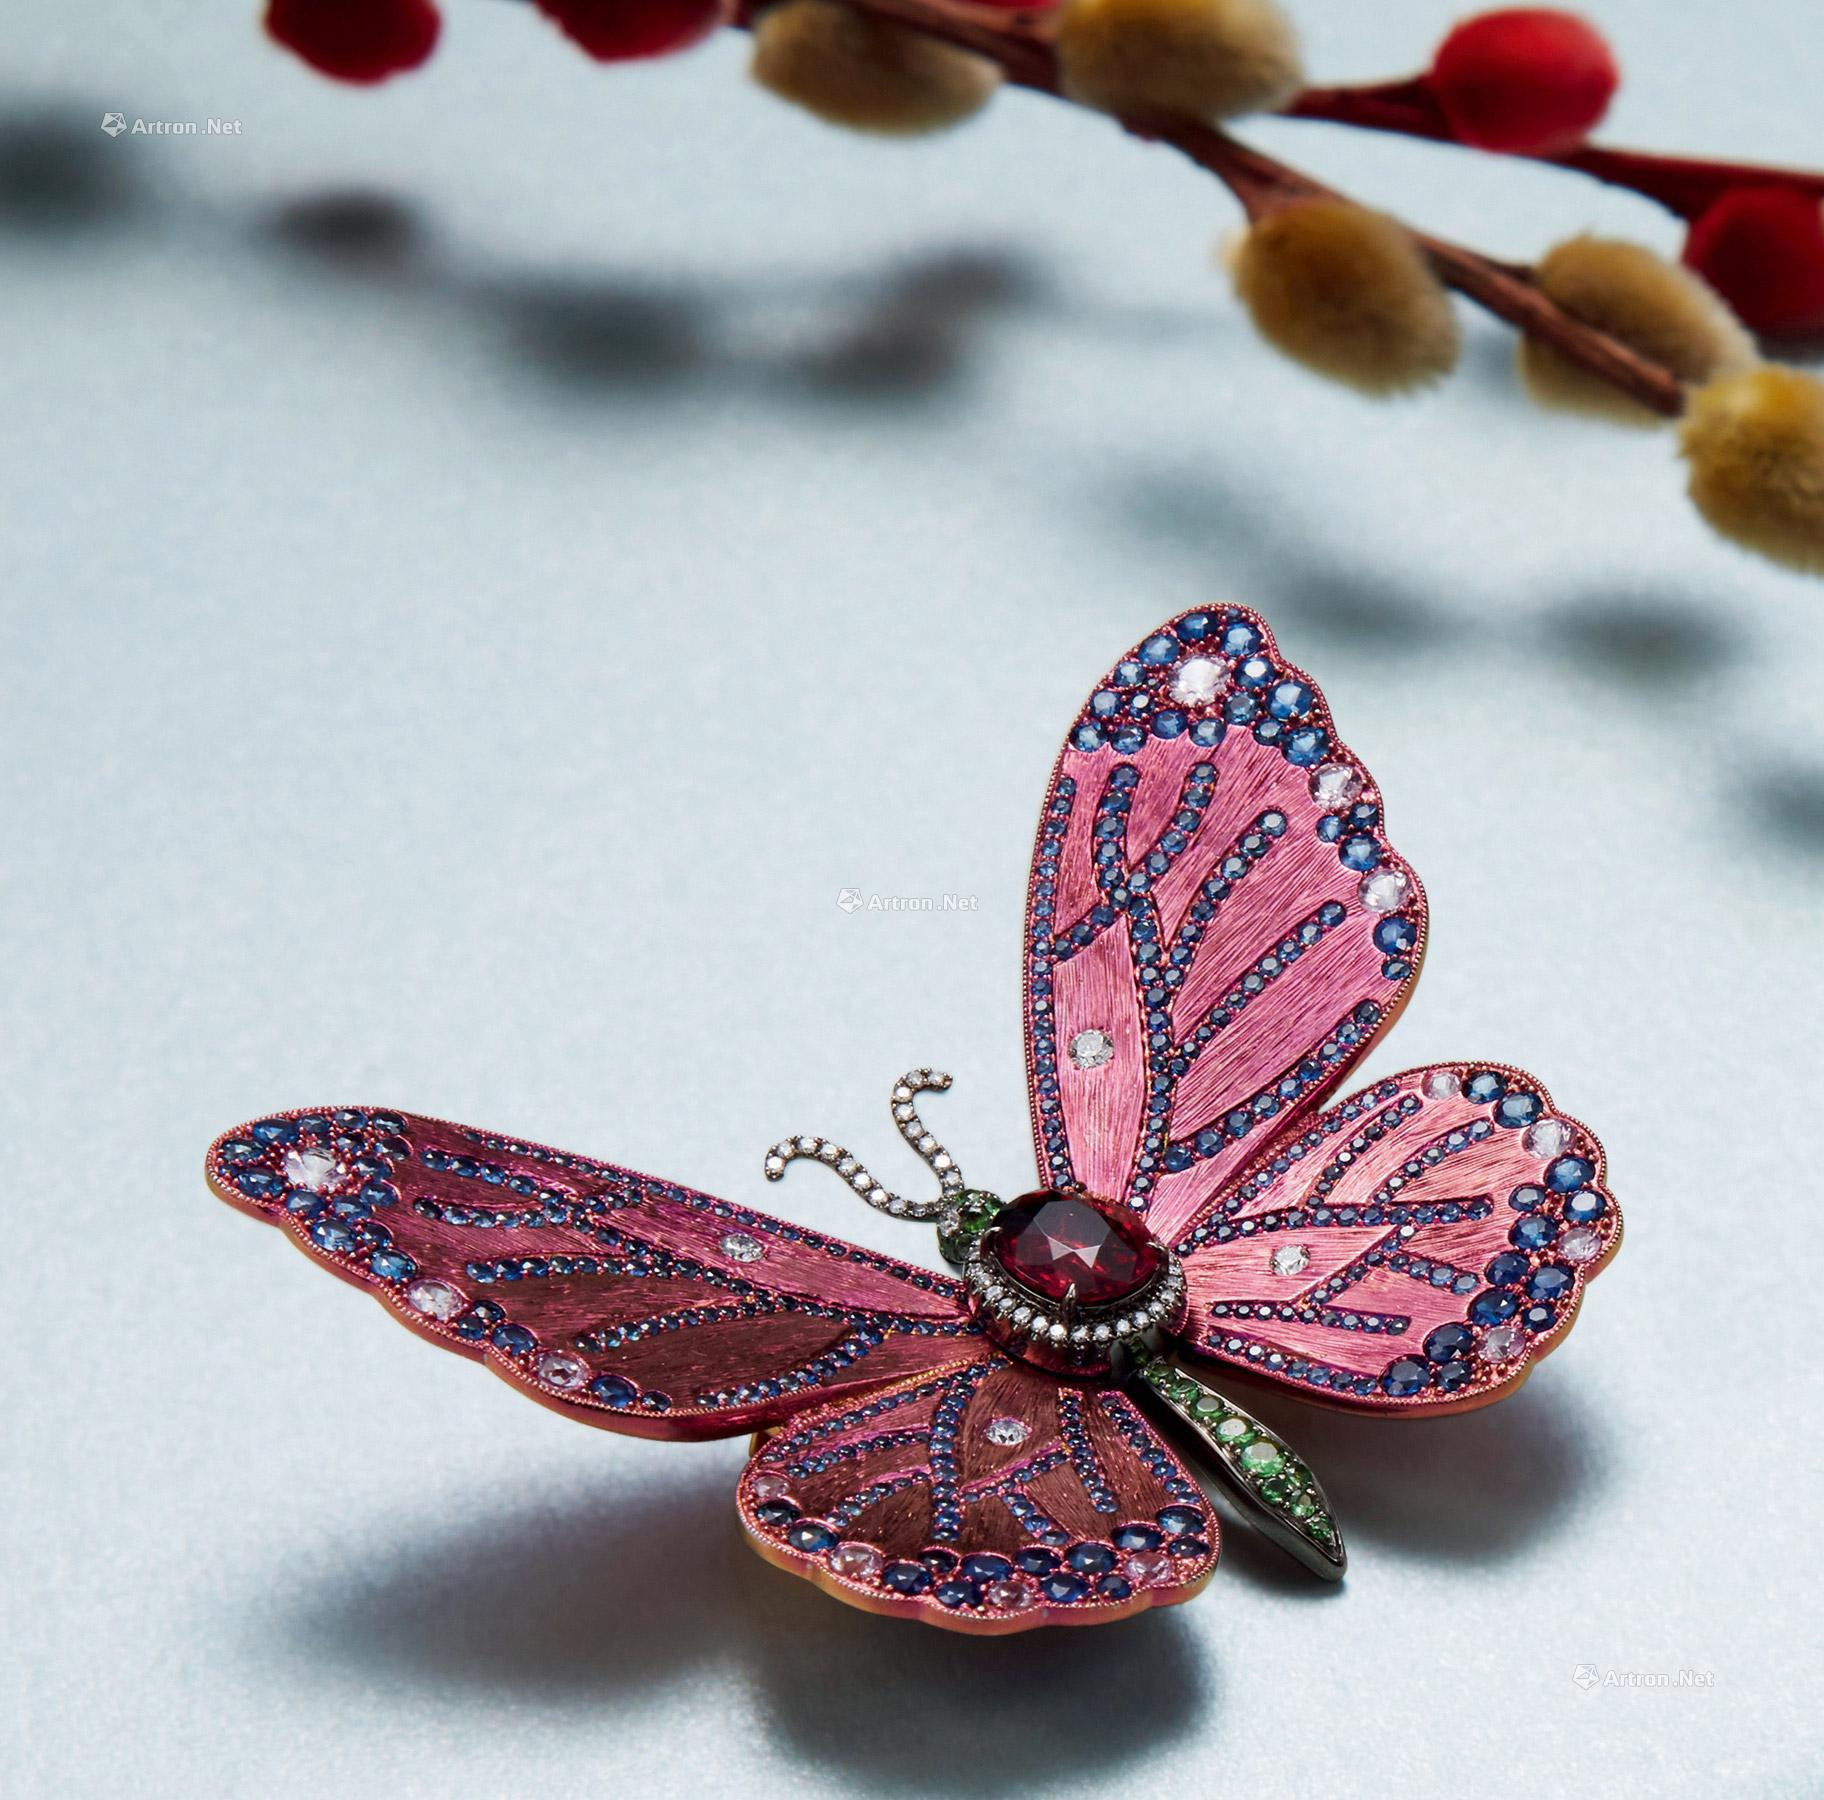 A COLORED GEM AND DIAMOND ‘BUTTERFLY’ BROOCH MOUNTED IN TITANIUM